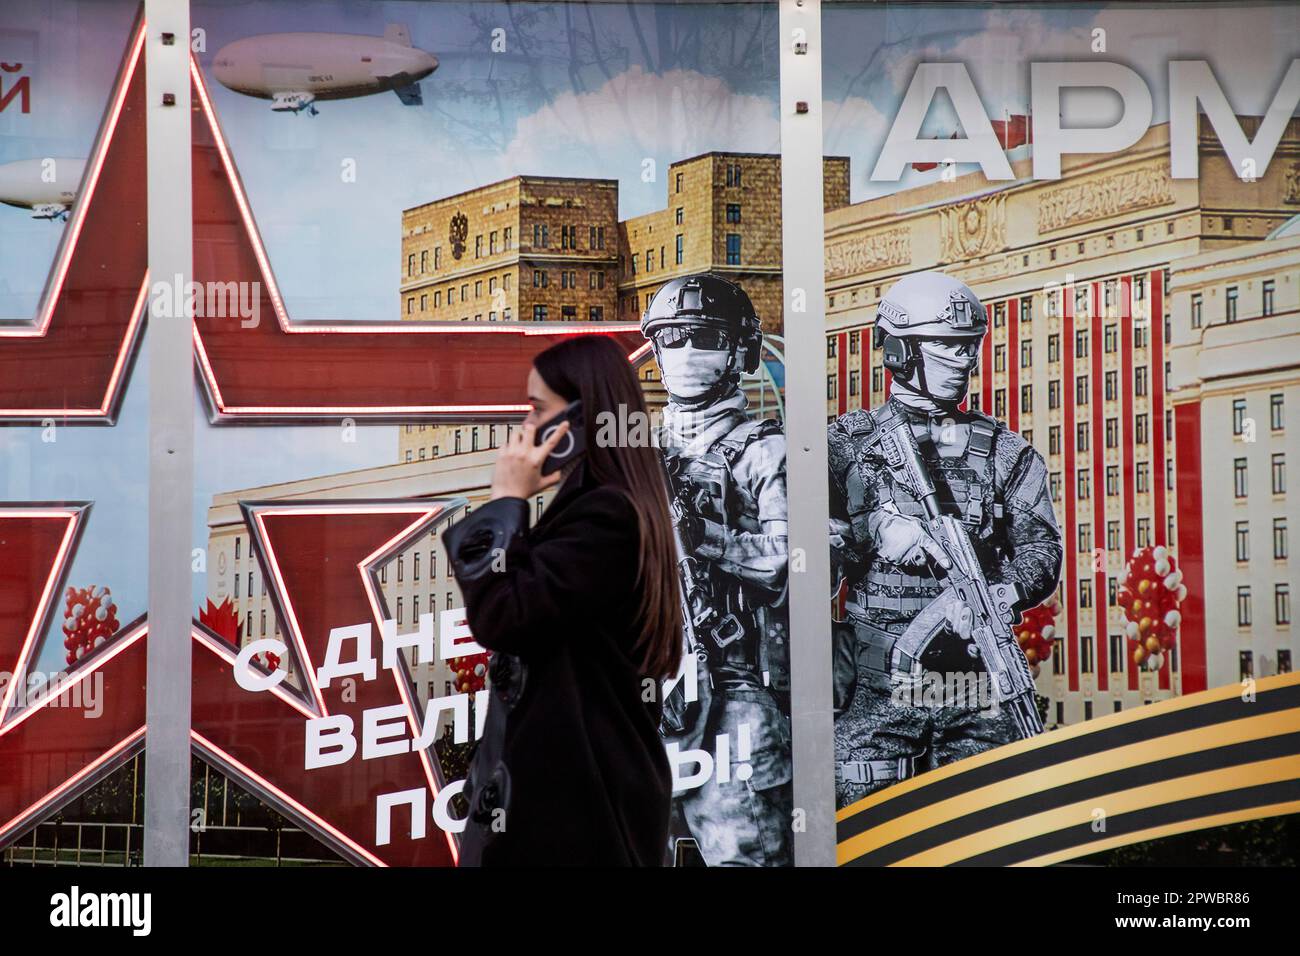 Moscow, Russia. 29th of April, 2023  A woman walks past the Army of Russia store with a festive banner for Victory Day celebration in the shop window in central Moscow, Russia. The banner reads 'Happy Great Victory Day!' Stock Photo